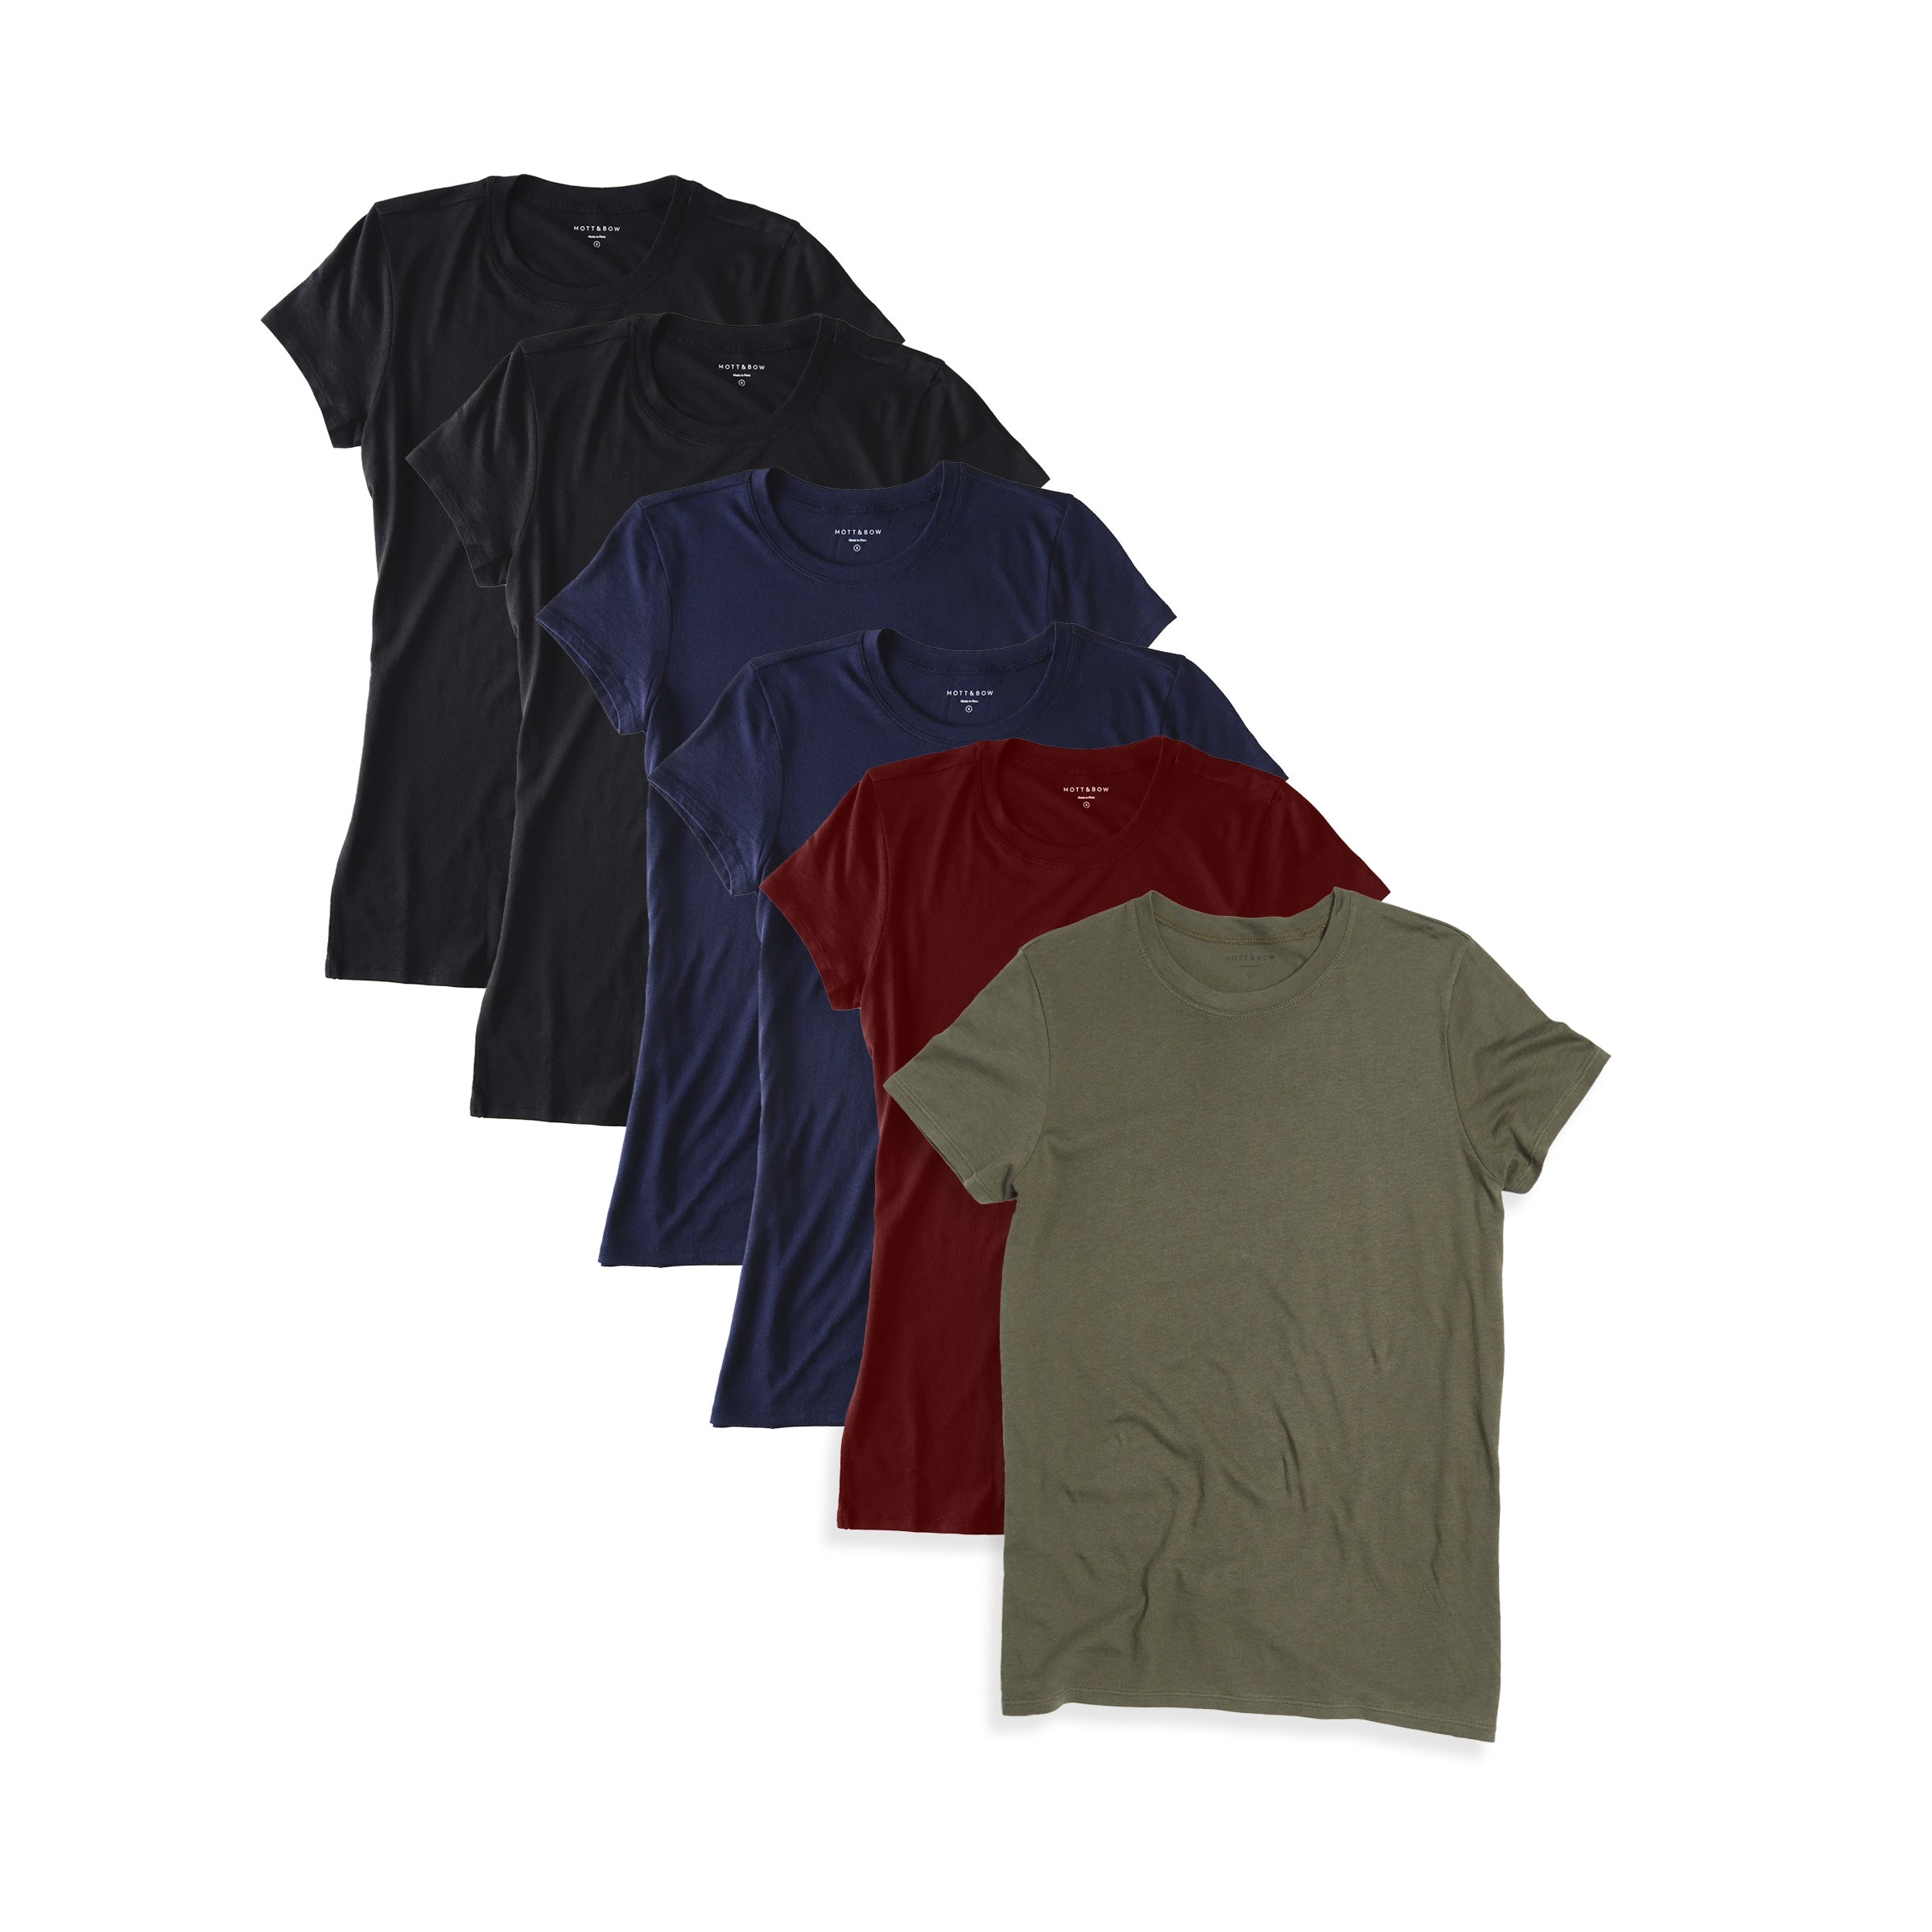 Women wearing Noir/Marine/Cramoisi/Vert Militaire Fitted Crew Marcy 6-Pack tees